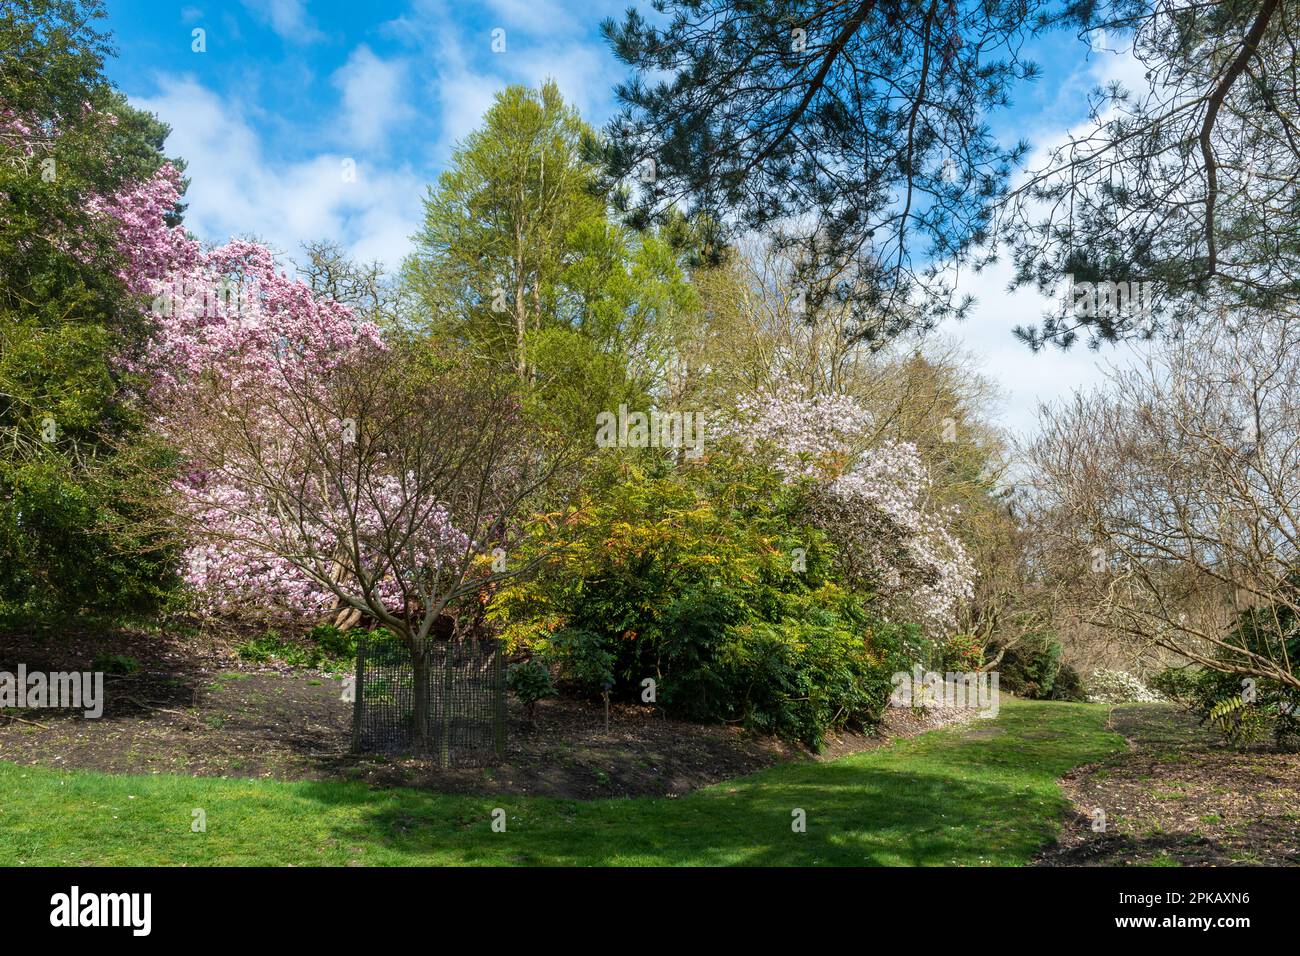 View of Valley Gardens during spring or April with flowering magnolia trees, in Windsor Great Park, Surrey, England, UK Stock Photo